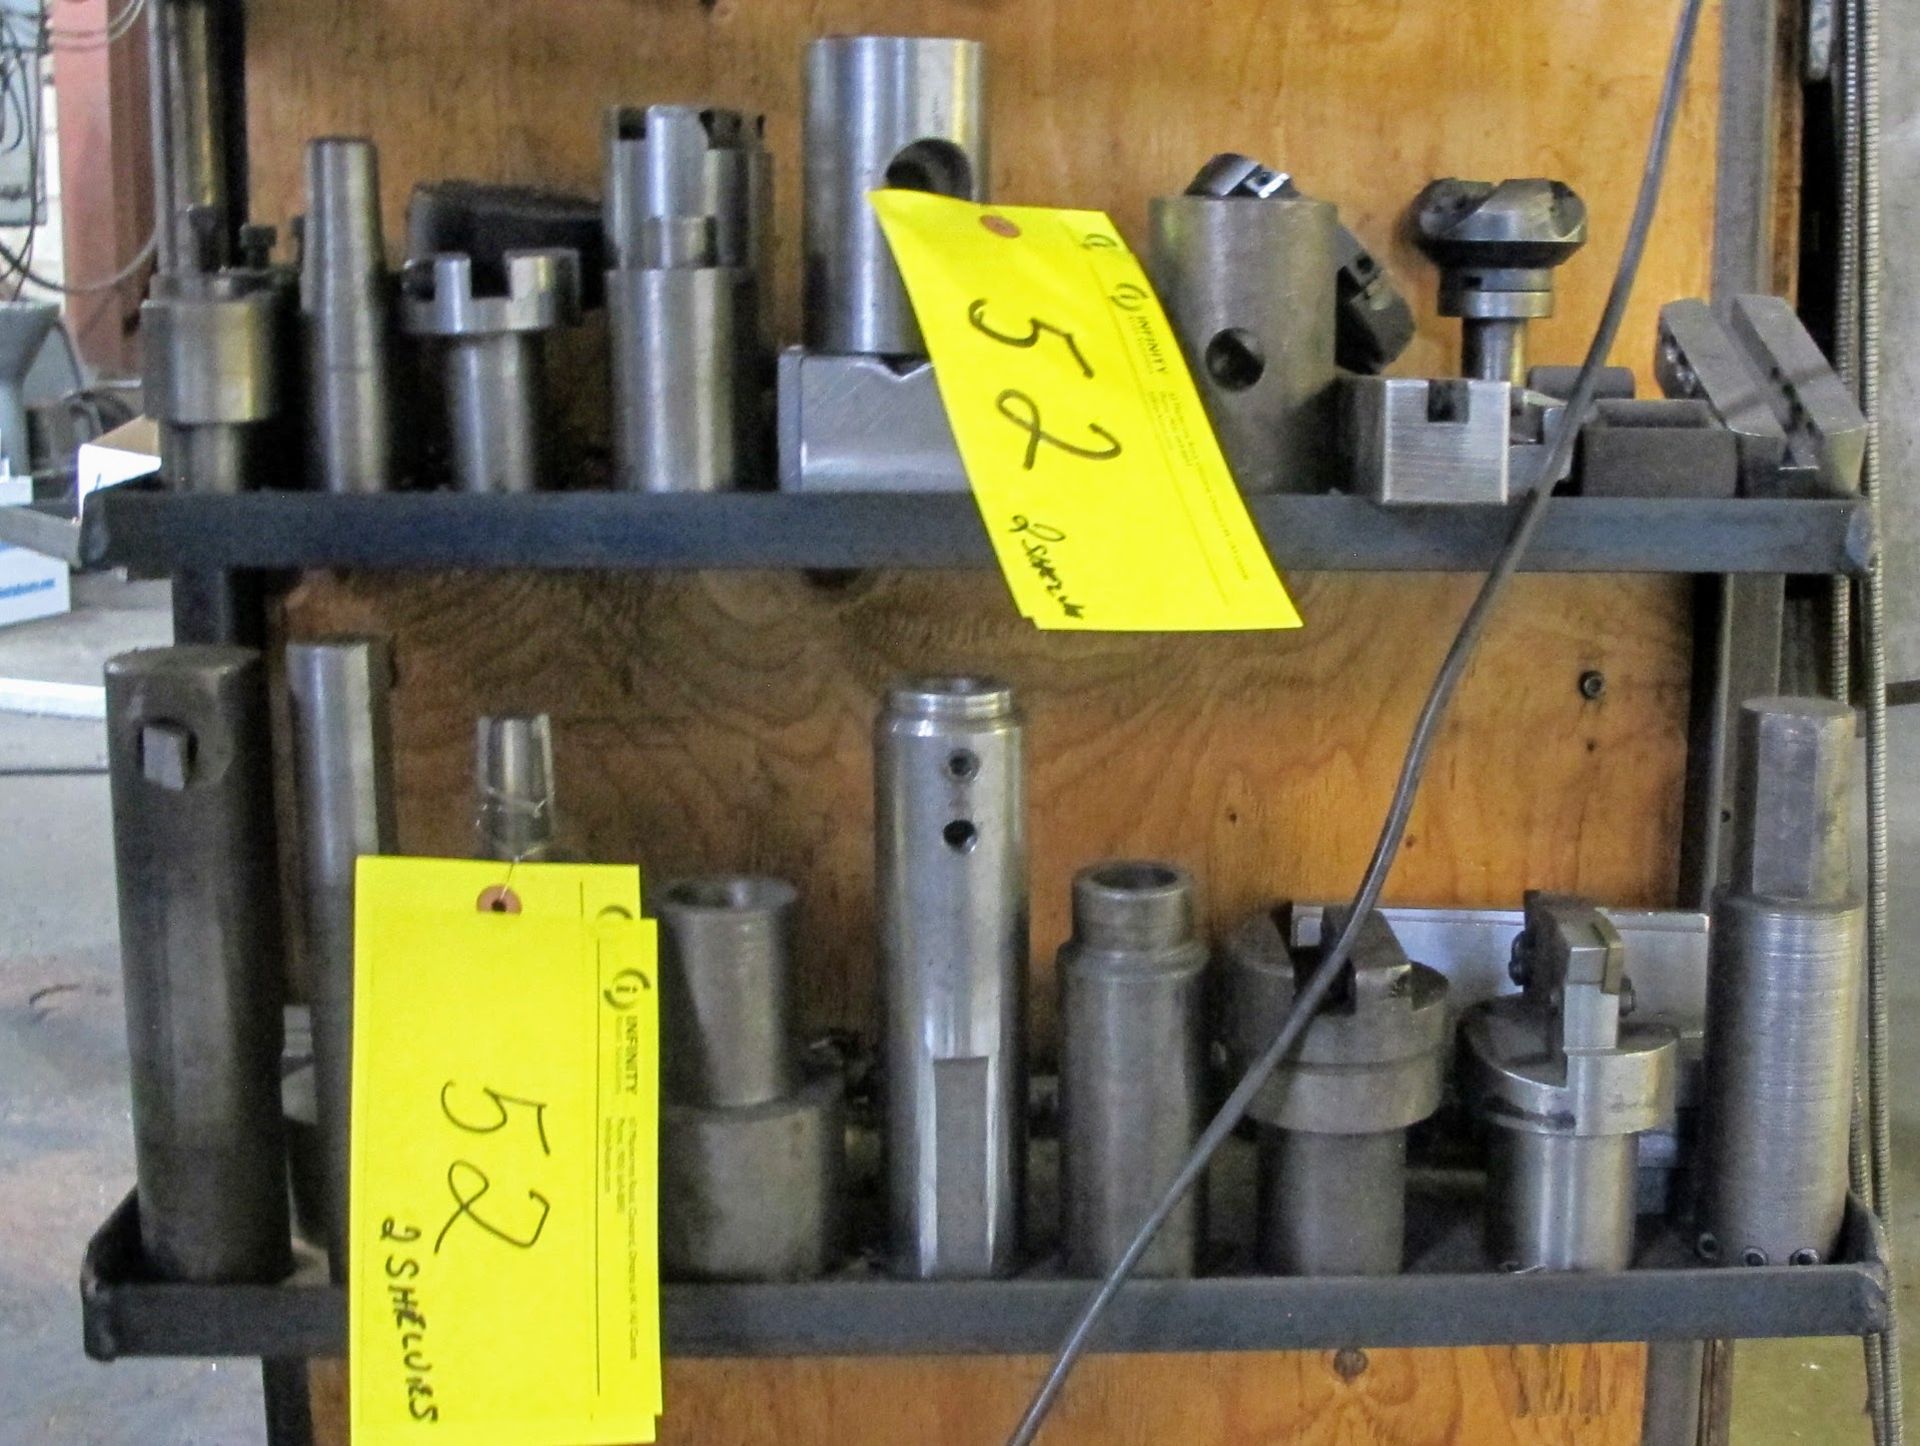 LOT OF TOOL HOLDERS, ARMS, BORING BARS AND CUTTING HEADS - Image 2 of 2